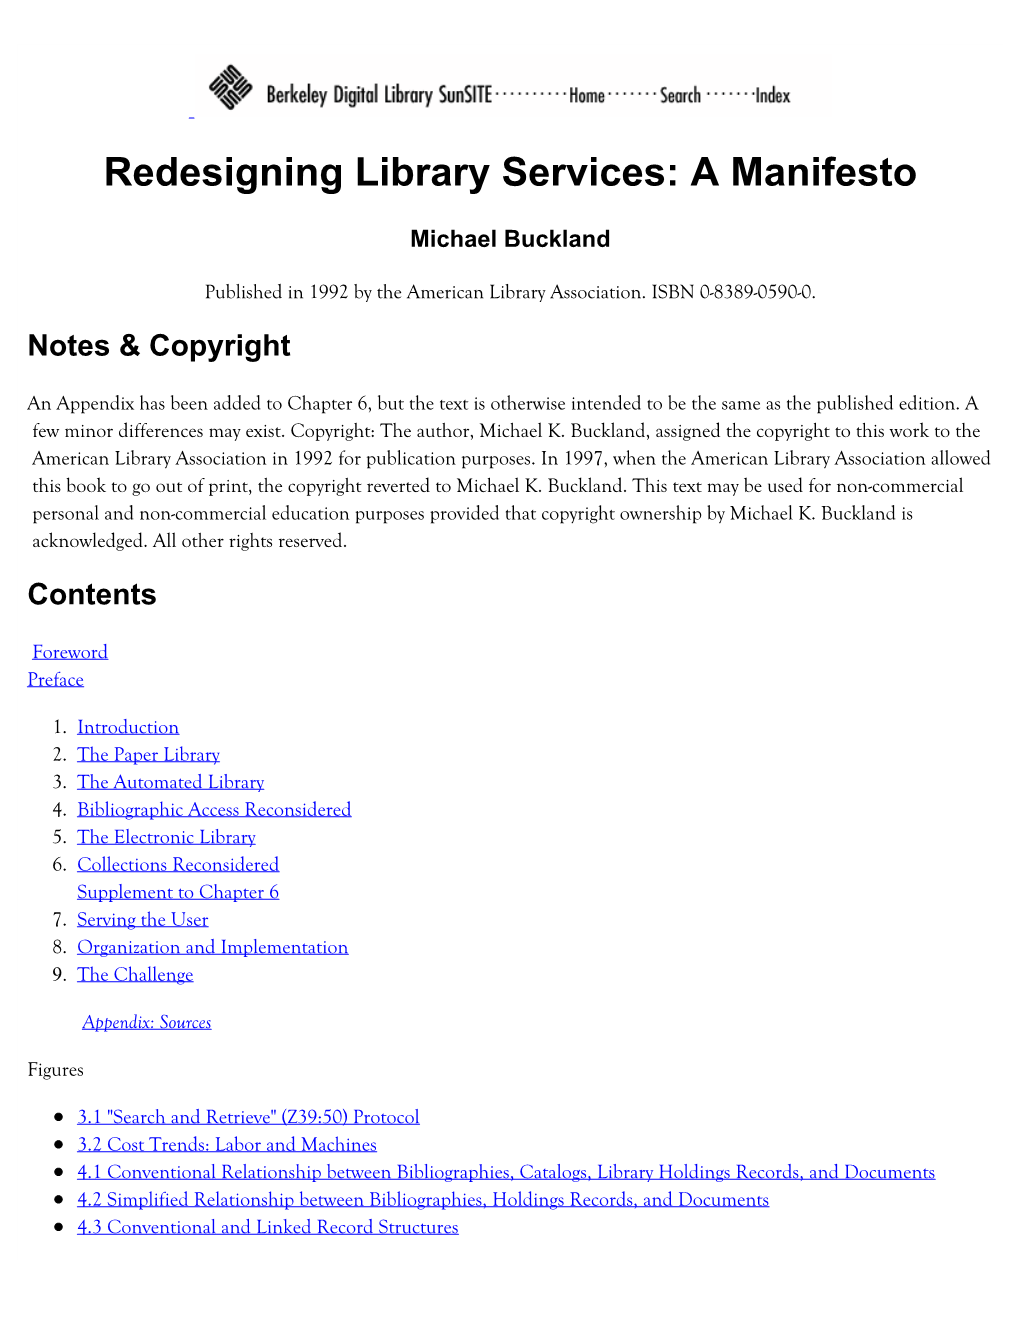 Redesigning Library Services: a Manifesto (HTML)